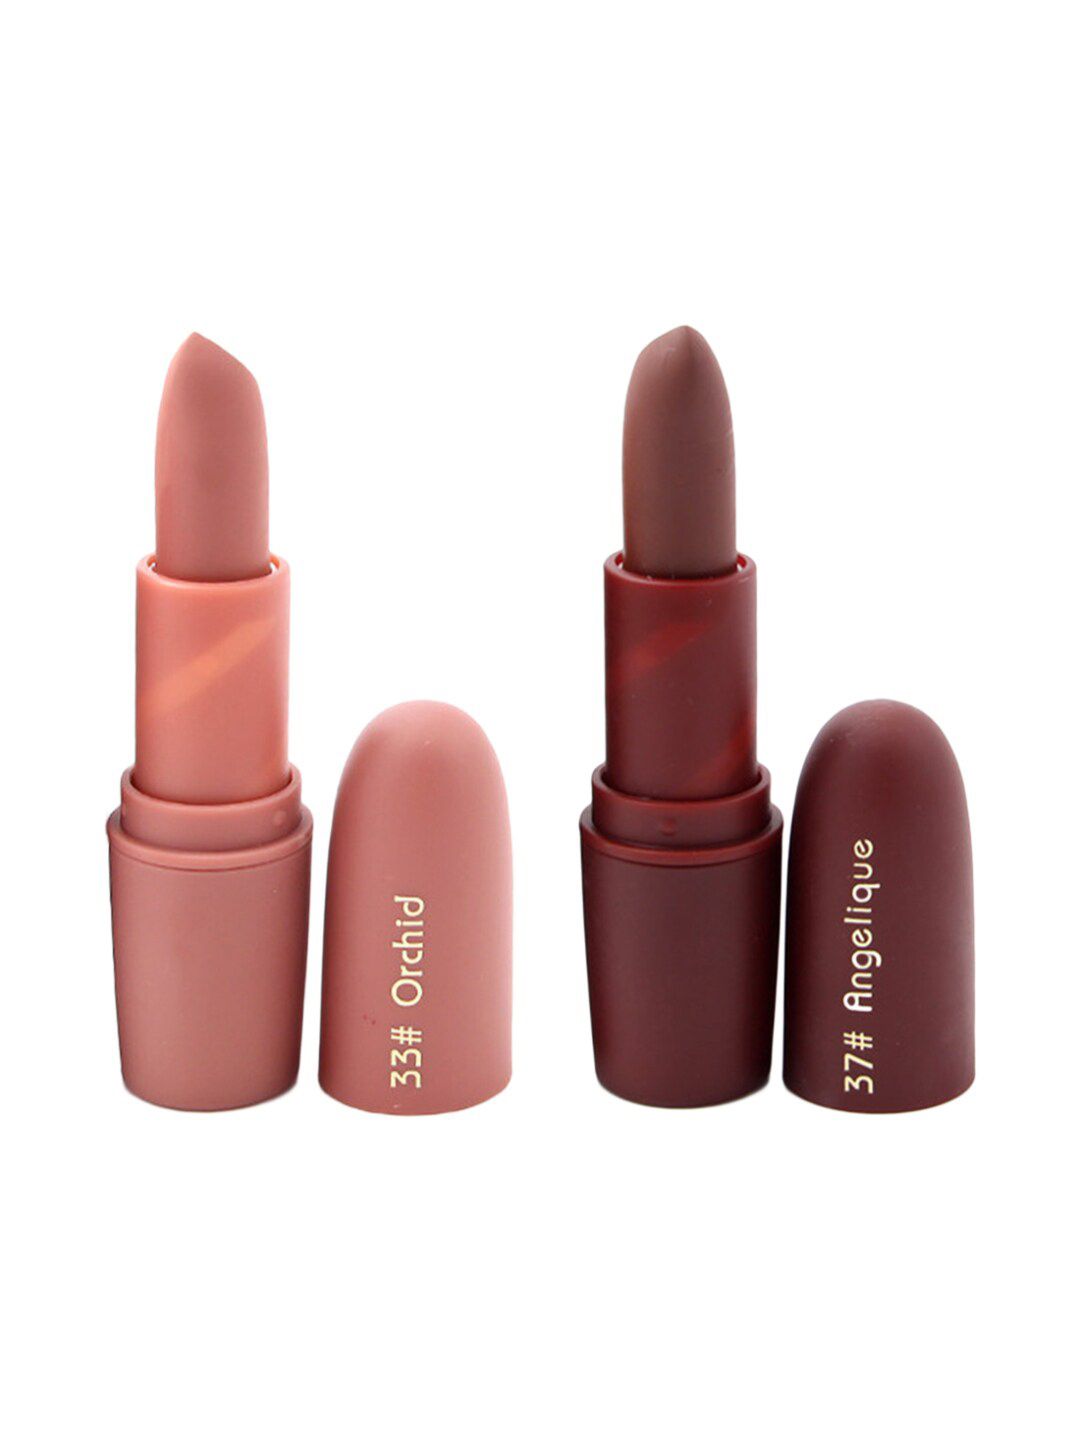 MISS ROSE Set of 2 Matte Creamy Lipsticks - Orchid 33 & Angelique 37 Price in India